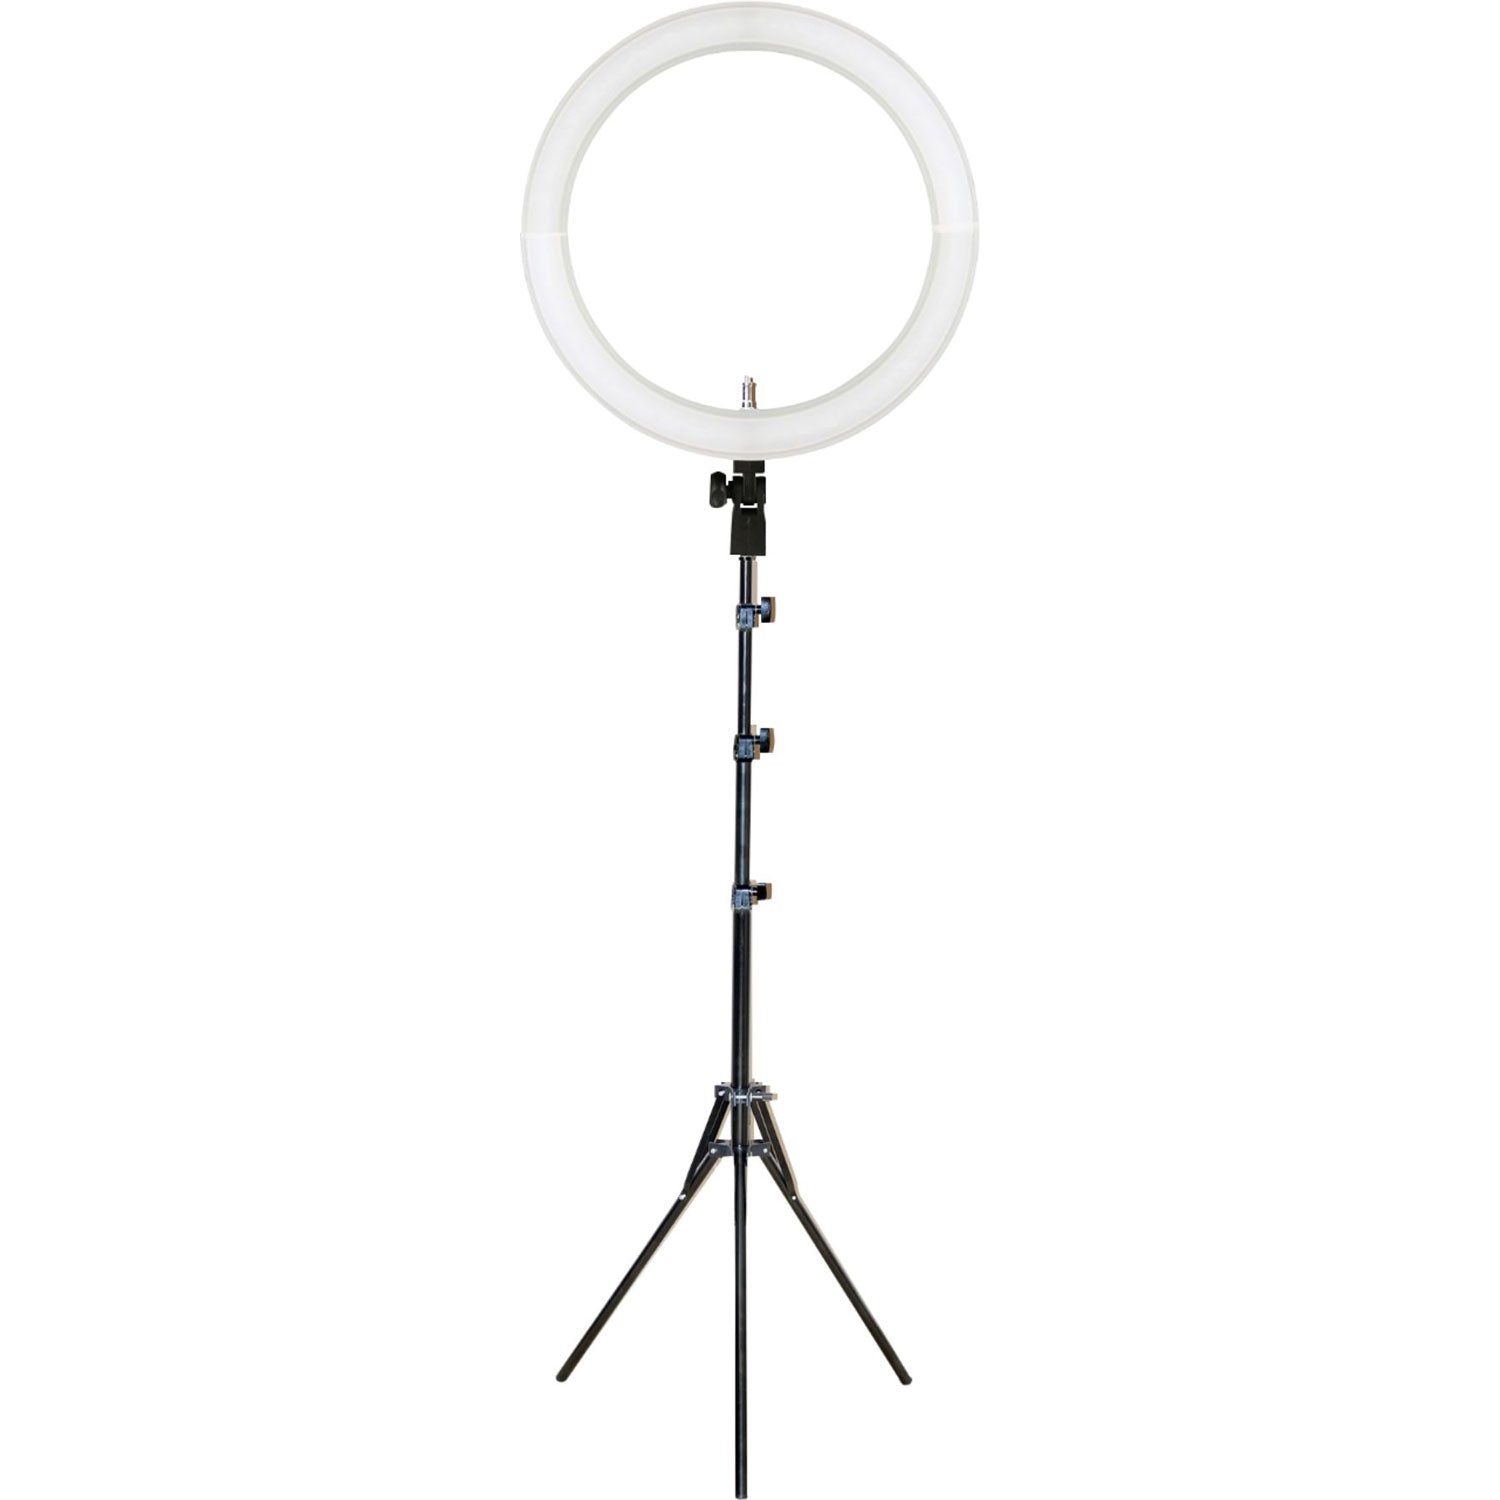 Ring Light Bi-Colour USB 30cm with Stand KAMERAZ Continuous Lighting